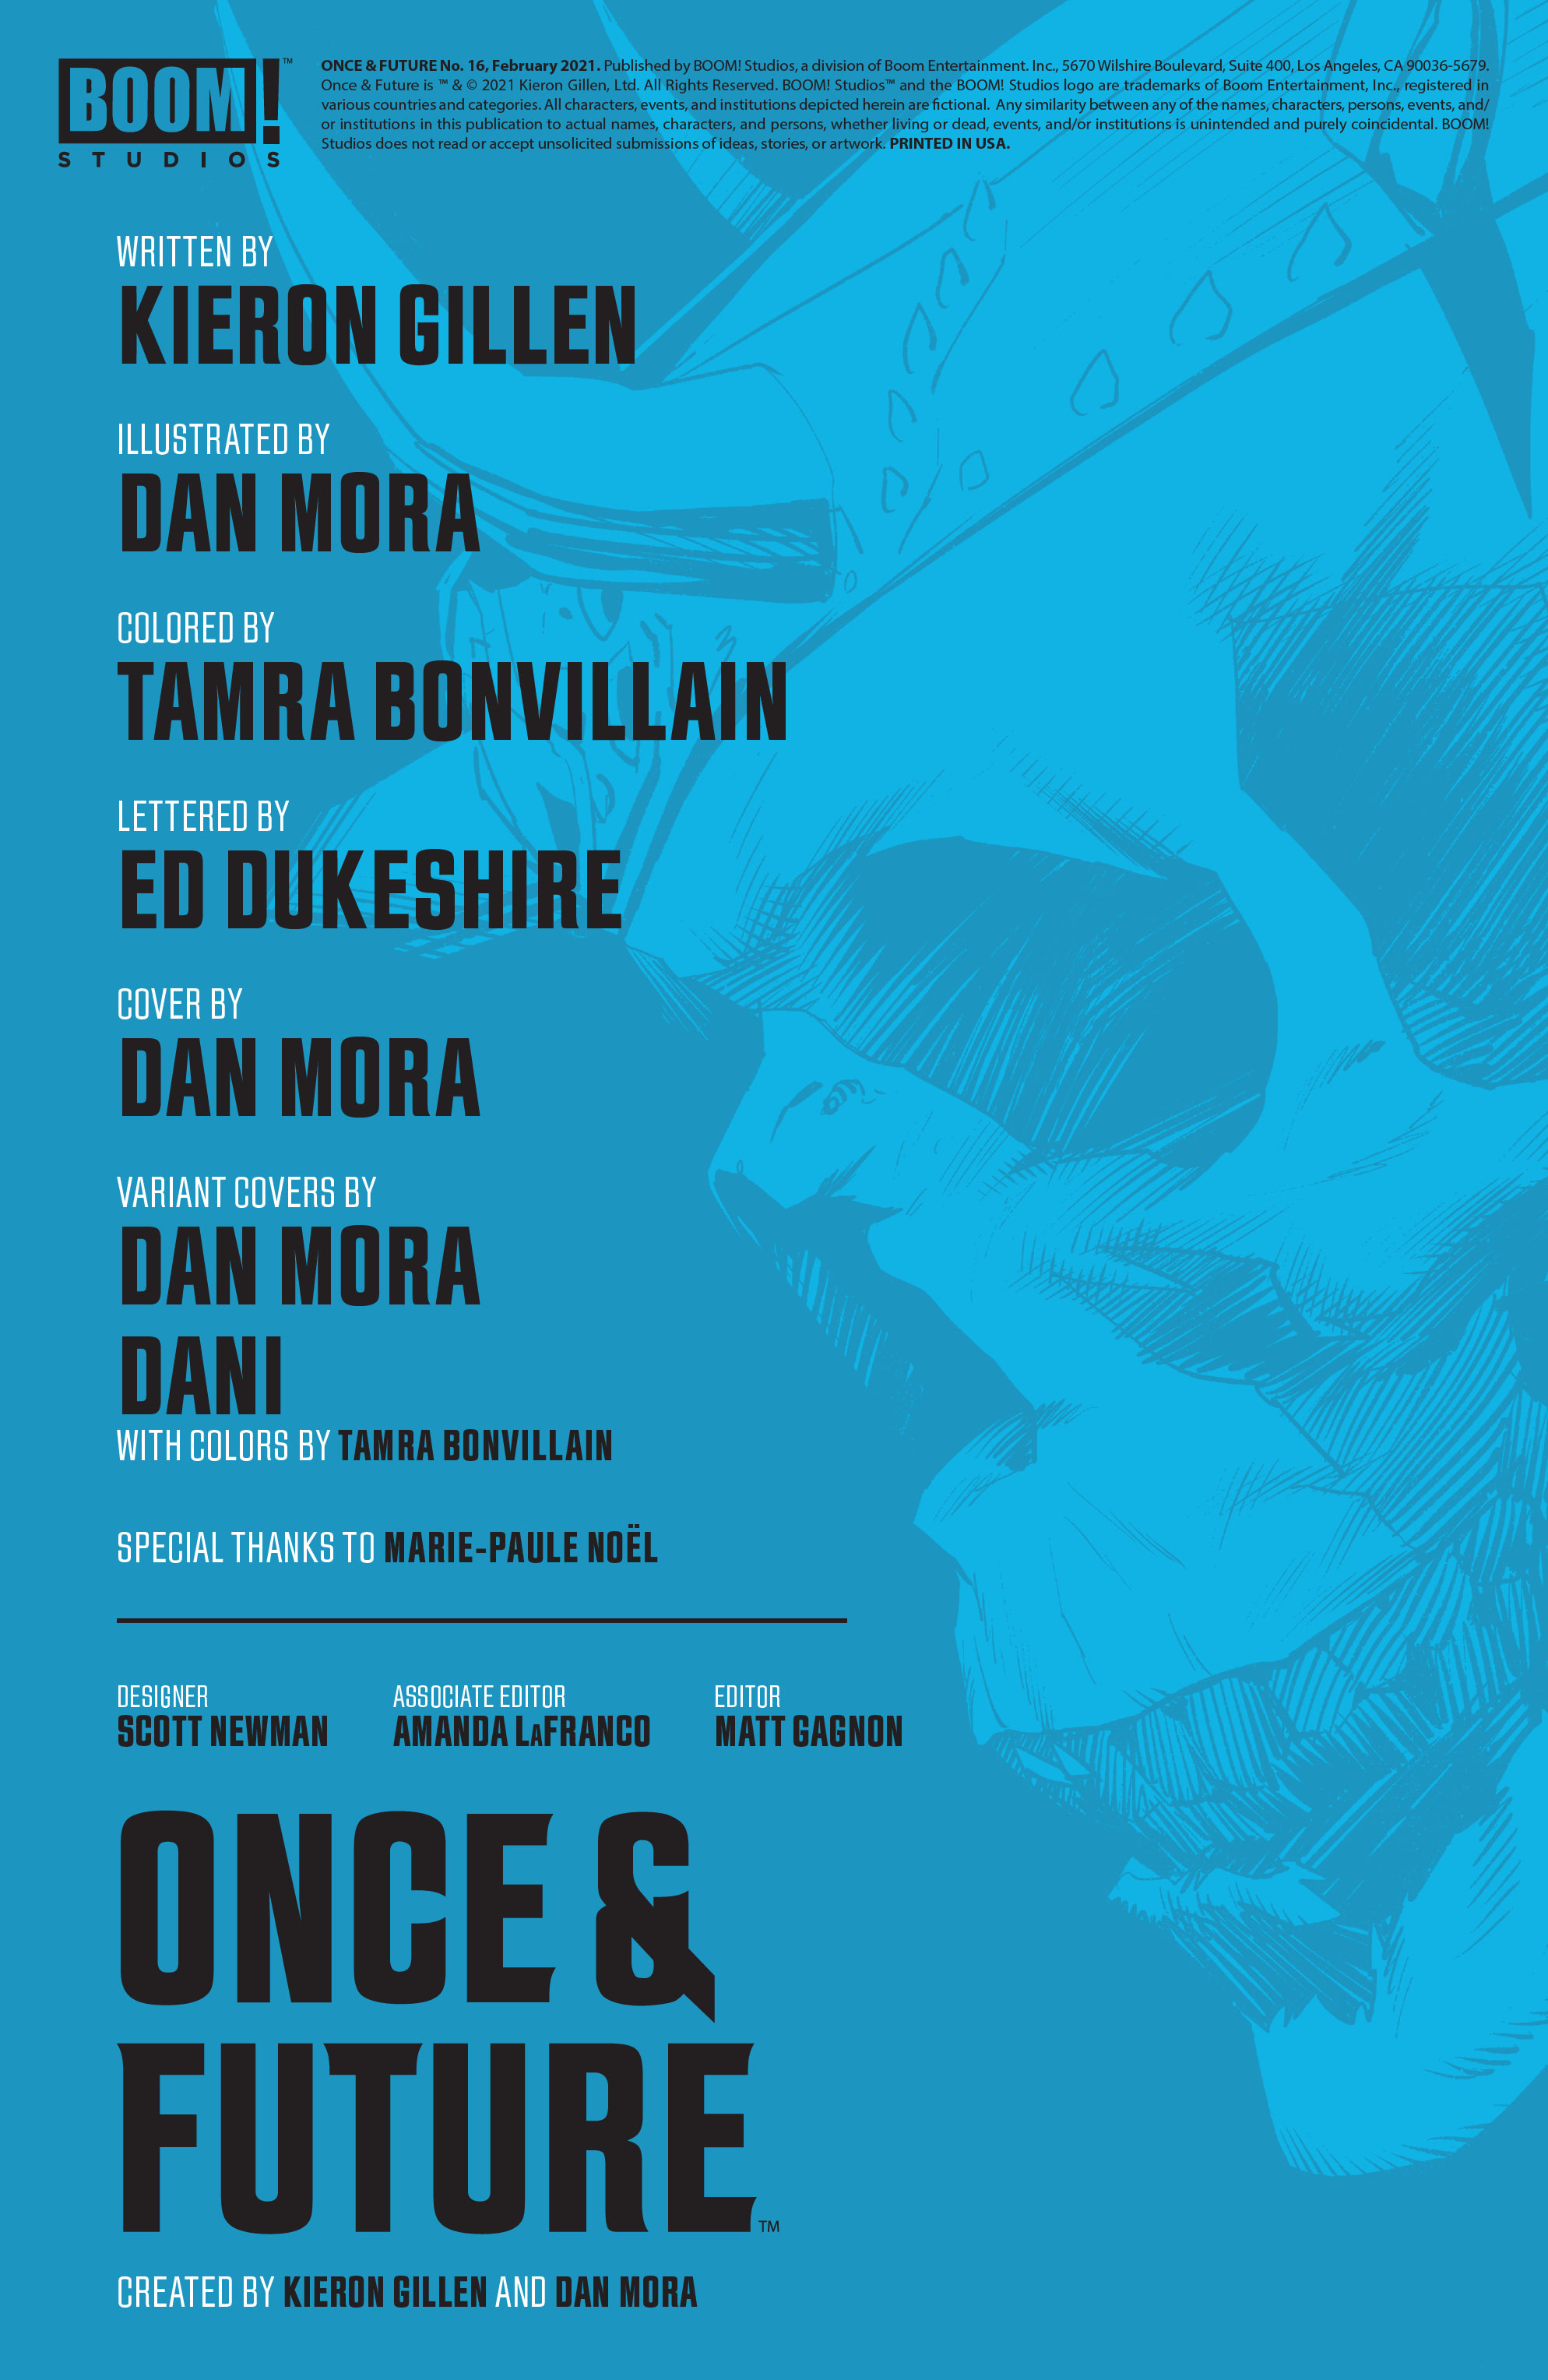 Read online Once & Future comic -  Issue #16 - 2